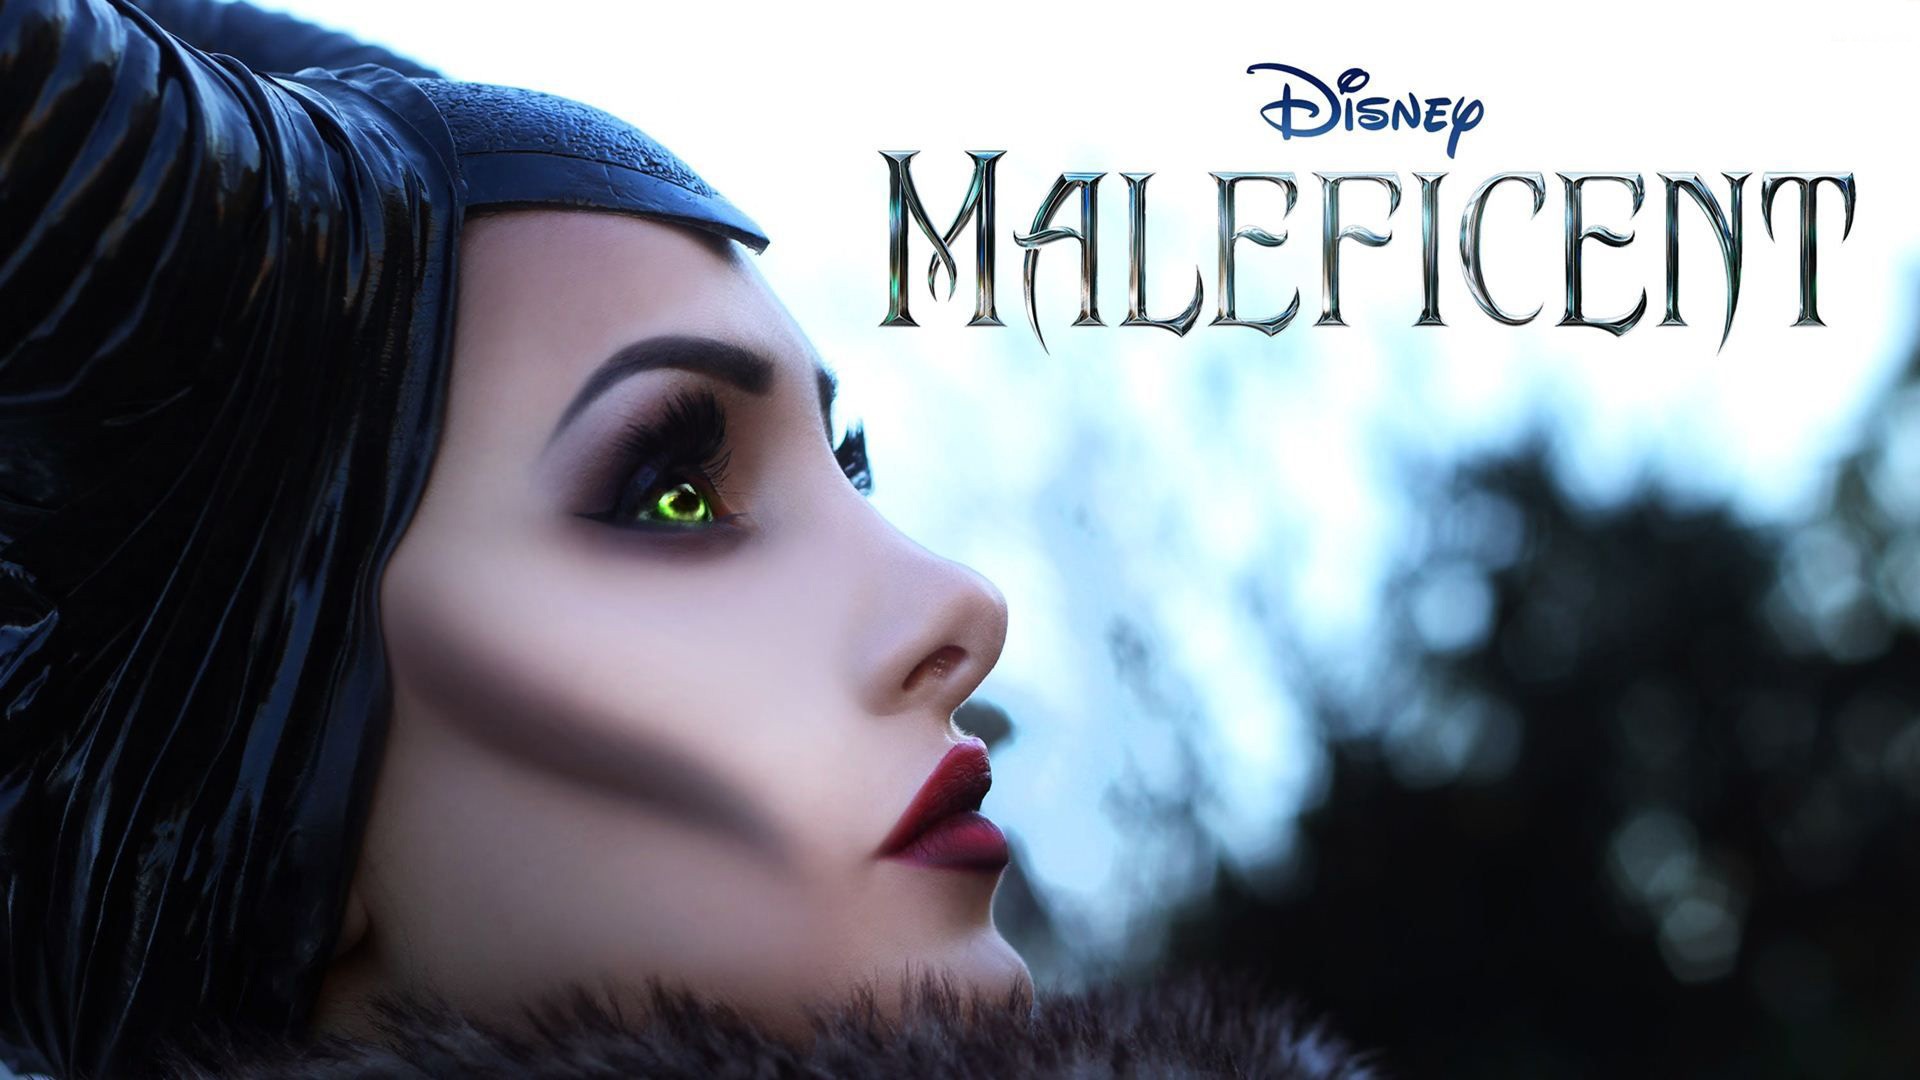 Maleficent 2014 HD movie wallpapers #10 - 1920x1080